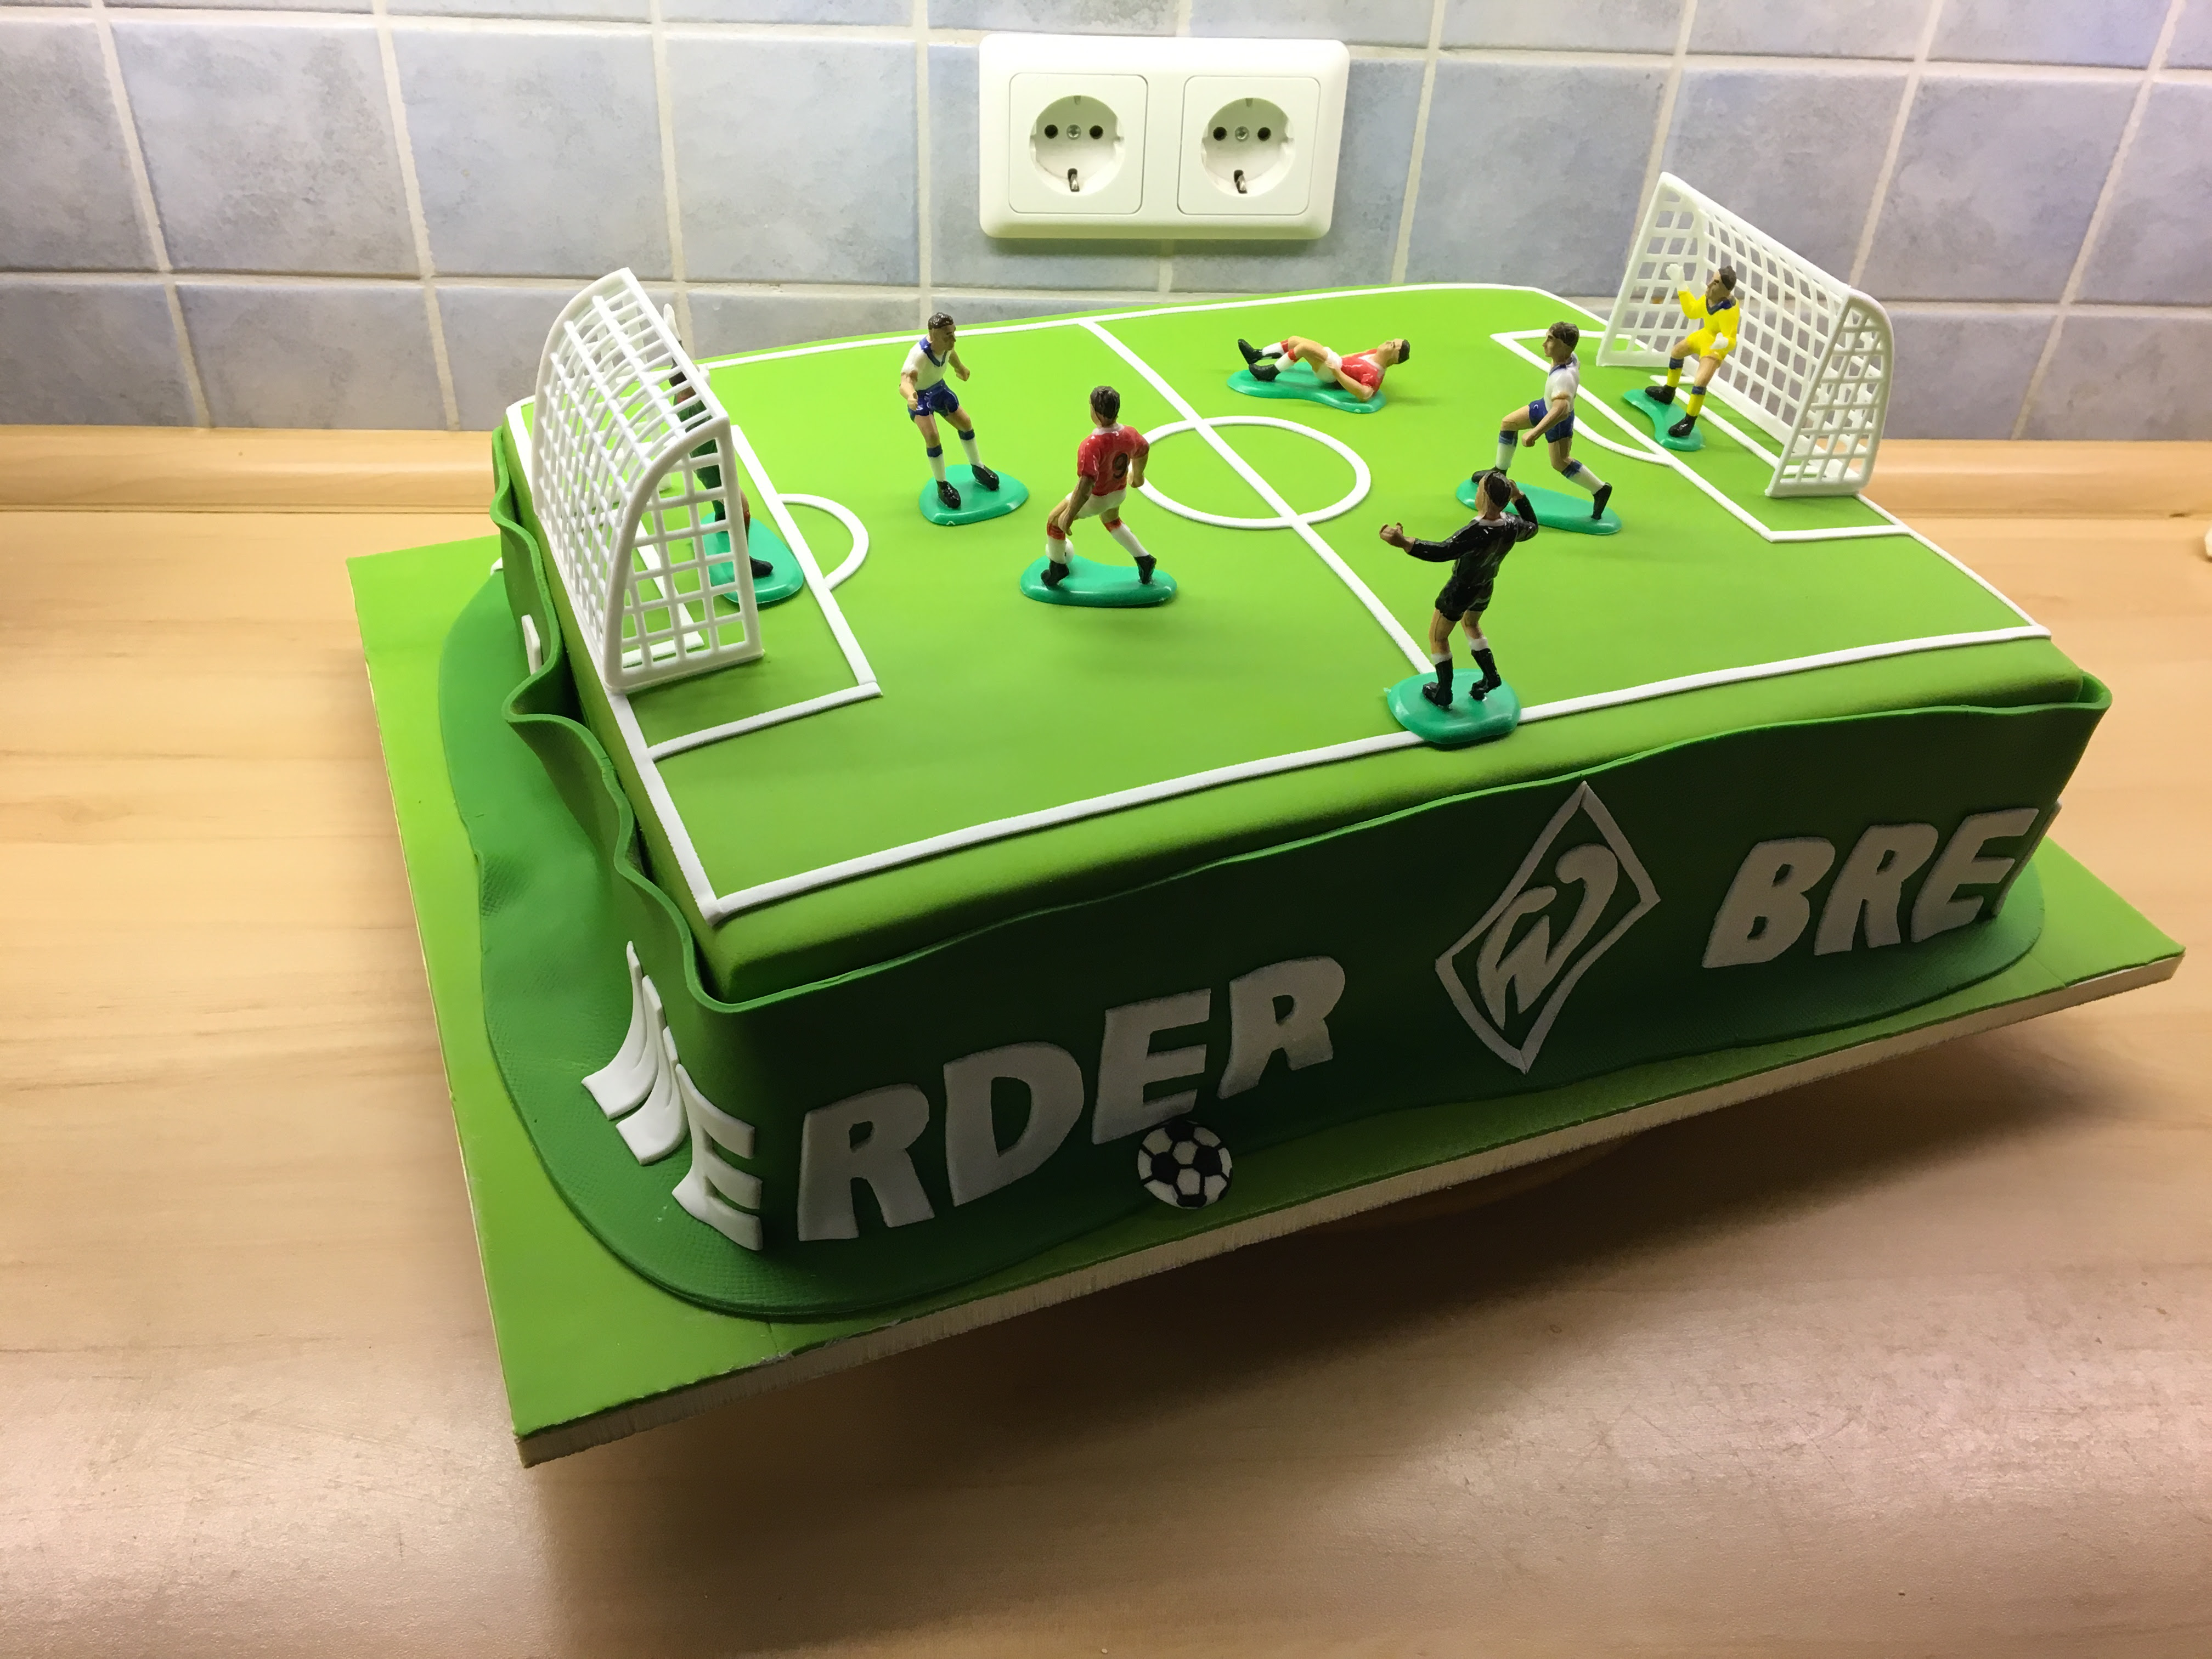 21+ schön Vorrat Kuchen Bremen : Werder Bremen Torte | Torten, Werder bremen, Motivtorten : Bremen is the smallest, and hamburg is the third smallest in terms of population and their main contribution to the economy is derived from their respective sea ports.